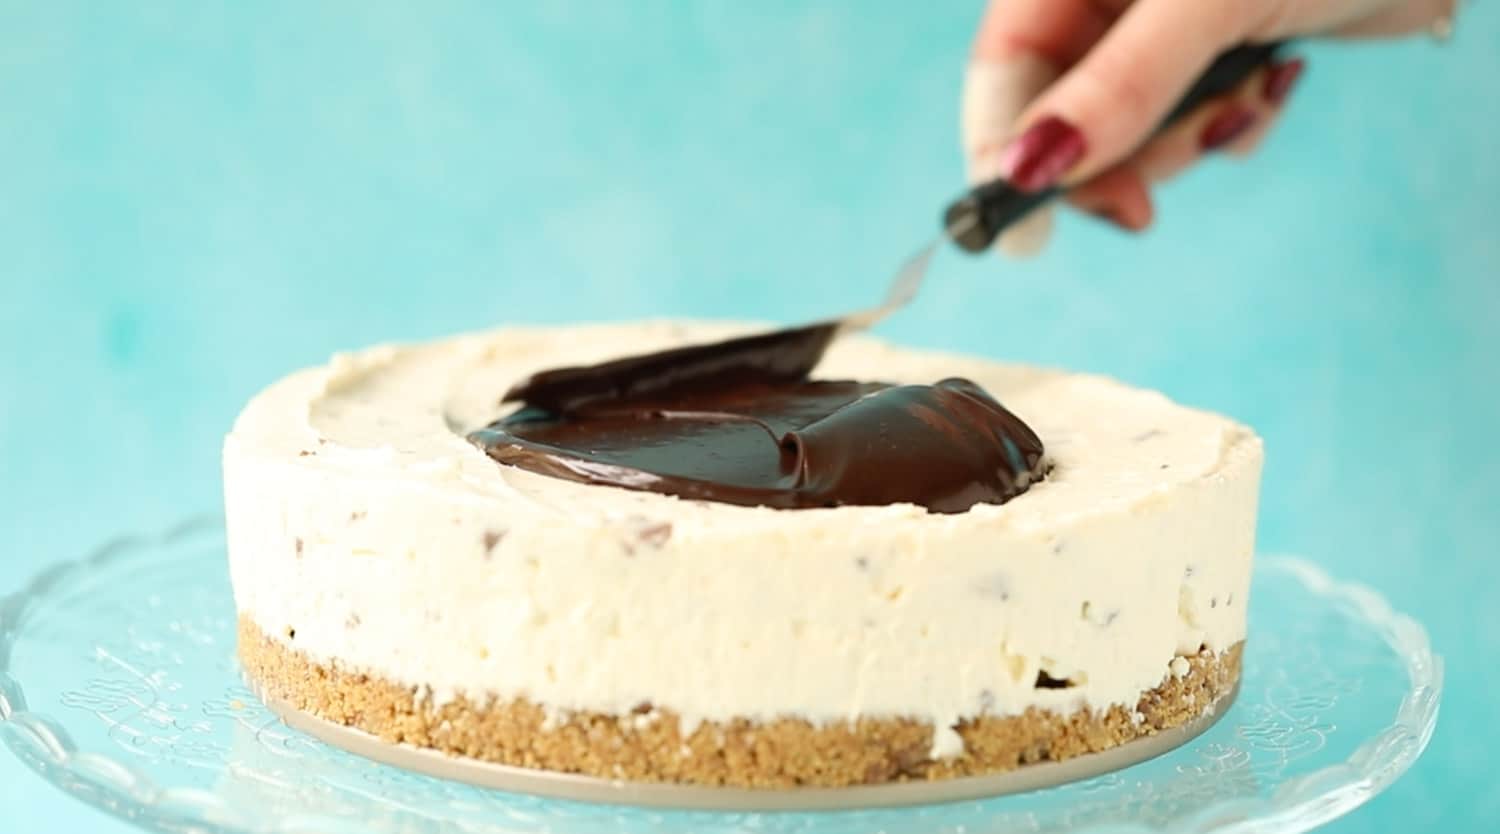 Spreading a cheesecake with chocolate ganache